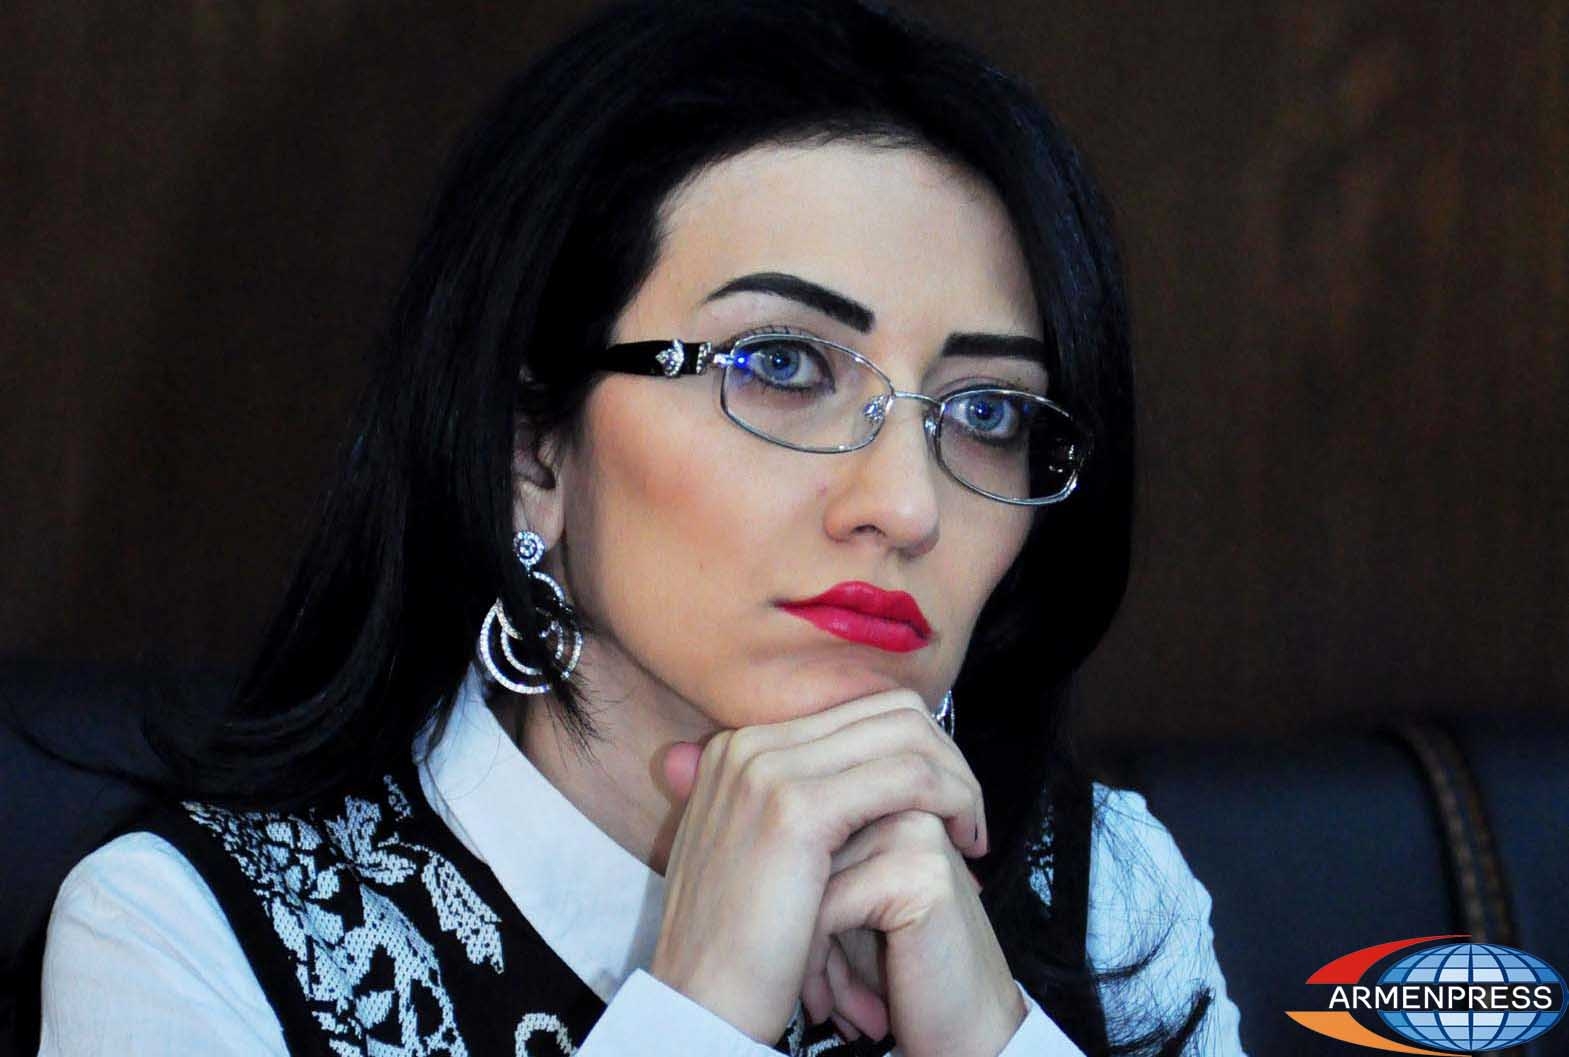 Azeris’ uproars against scandalous facts and reality were doomed to failure: Arpine 
Hovhannisyan